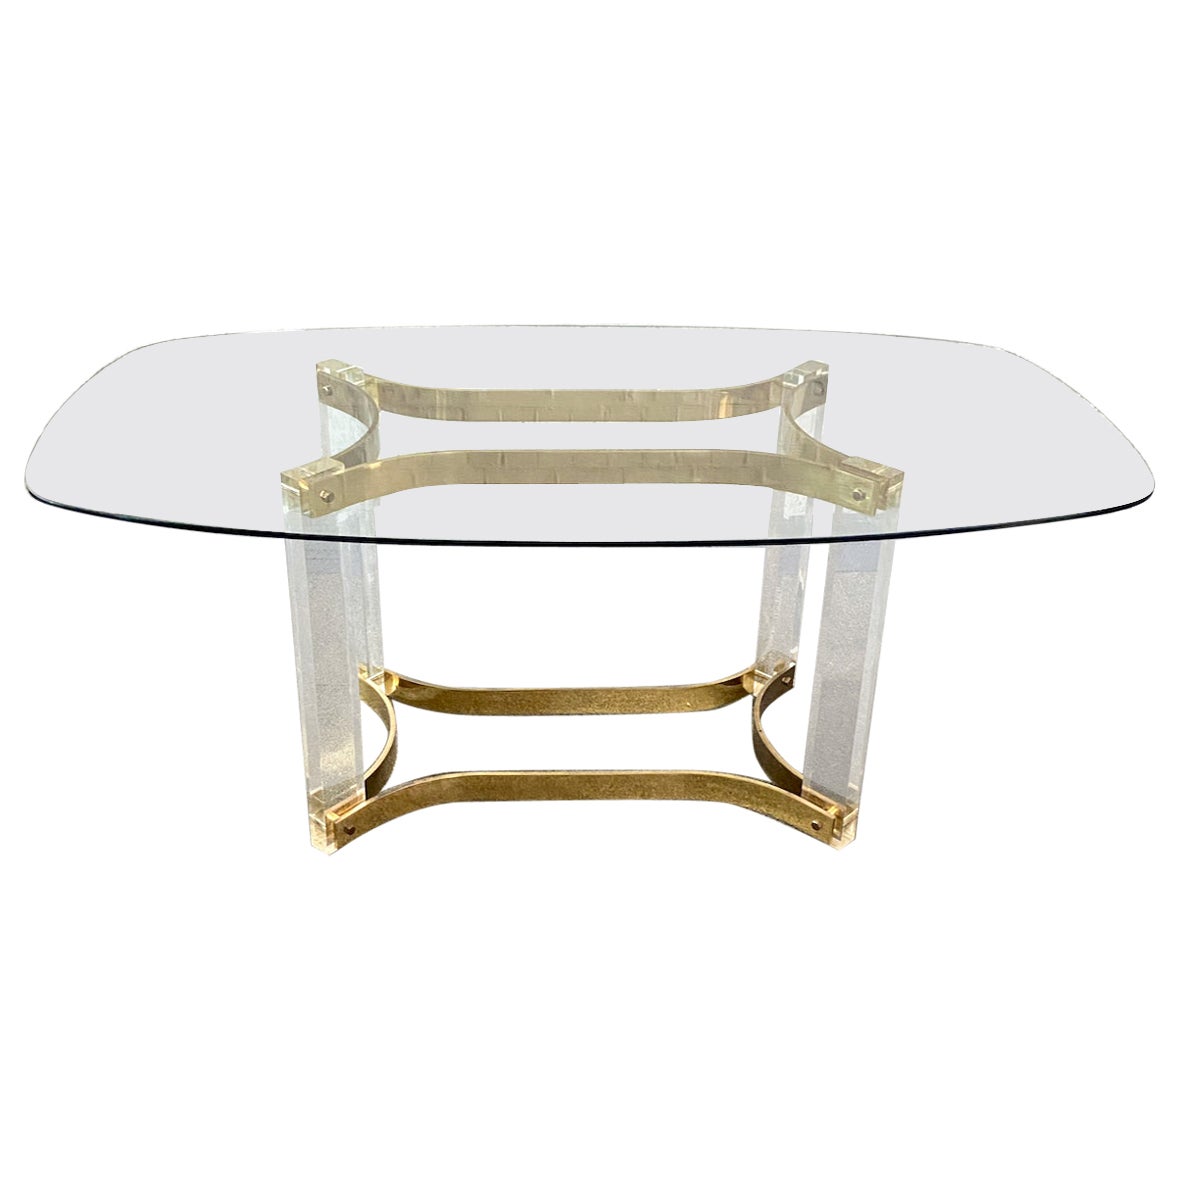 Alessandro Albrizzi lucite & brass dining room table - Hollywood Regency